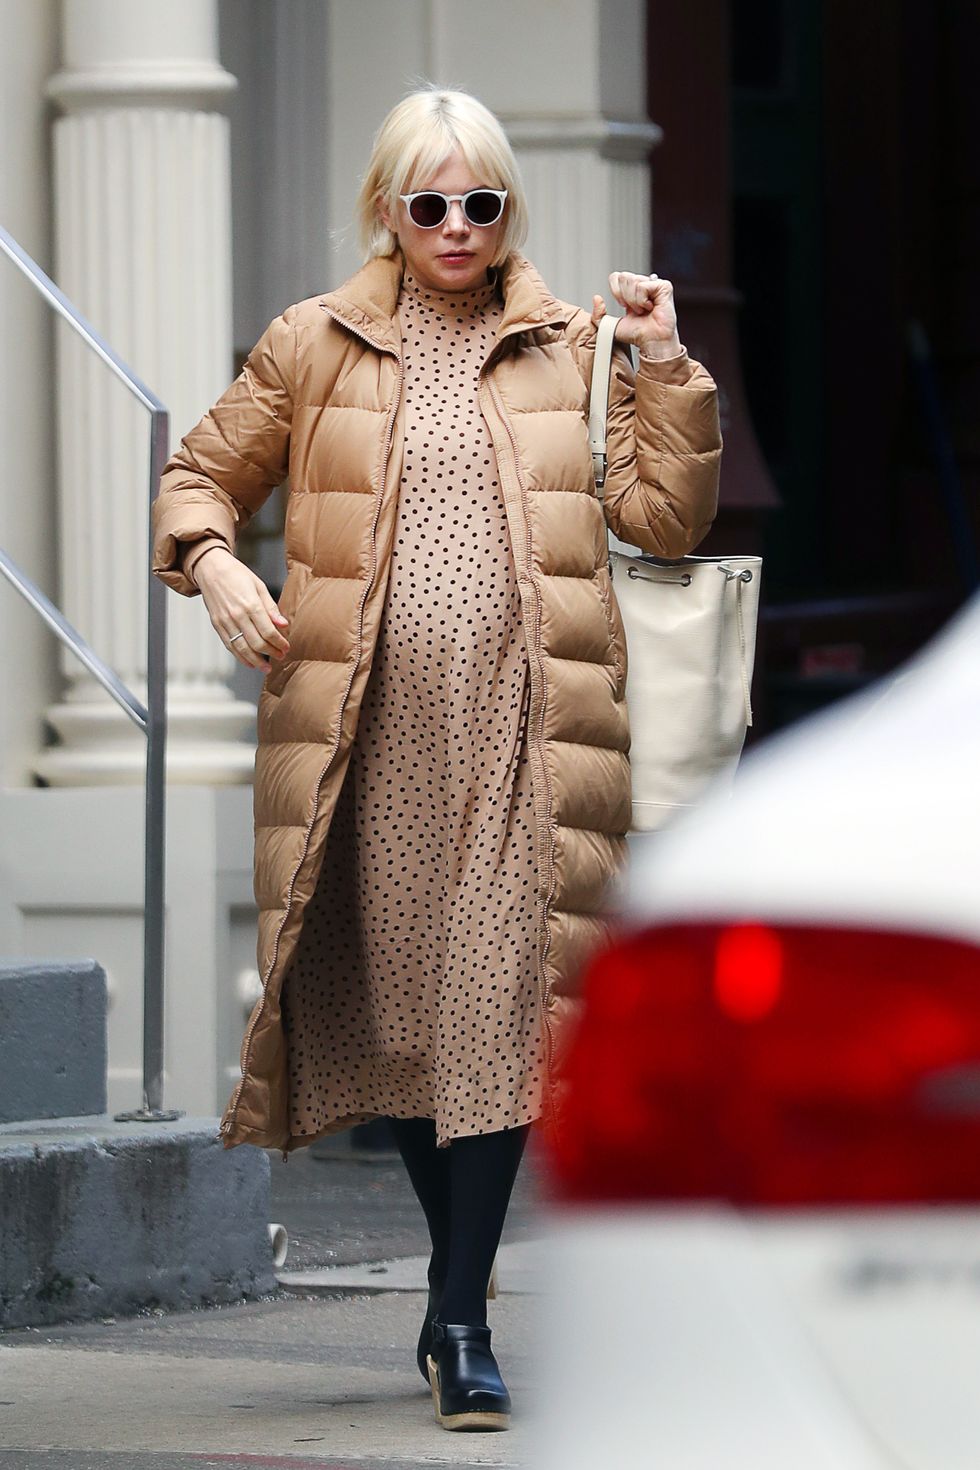 EXCLUSIVE: Michelle Williams Shows Her Growing Baby Bump While Out and About in New York City.